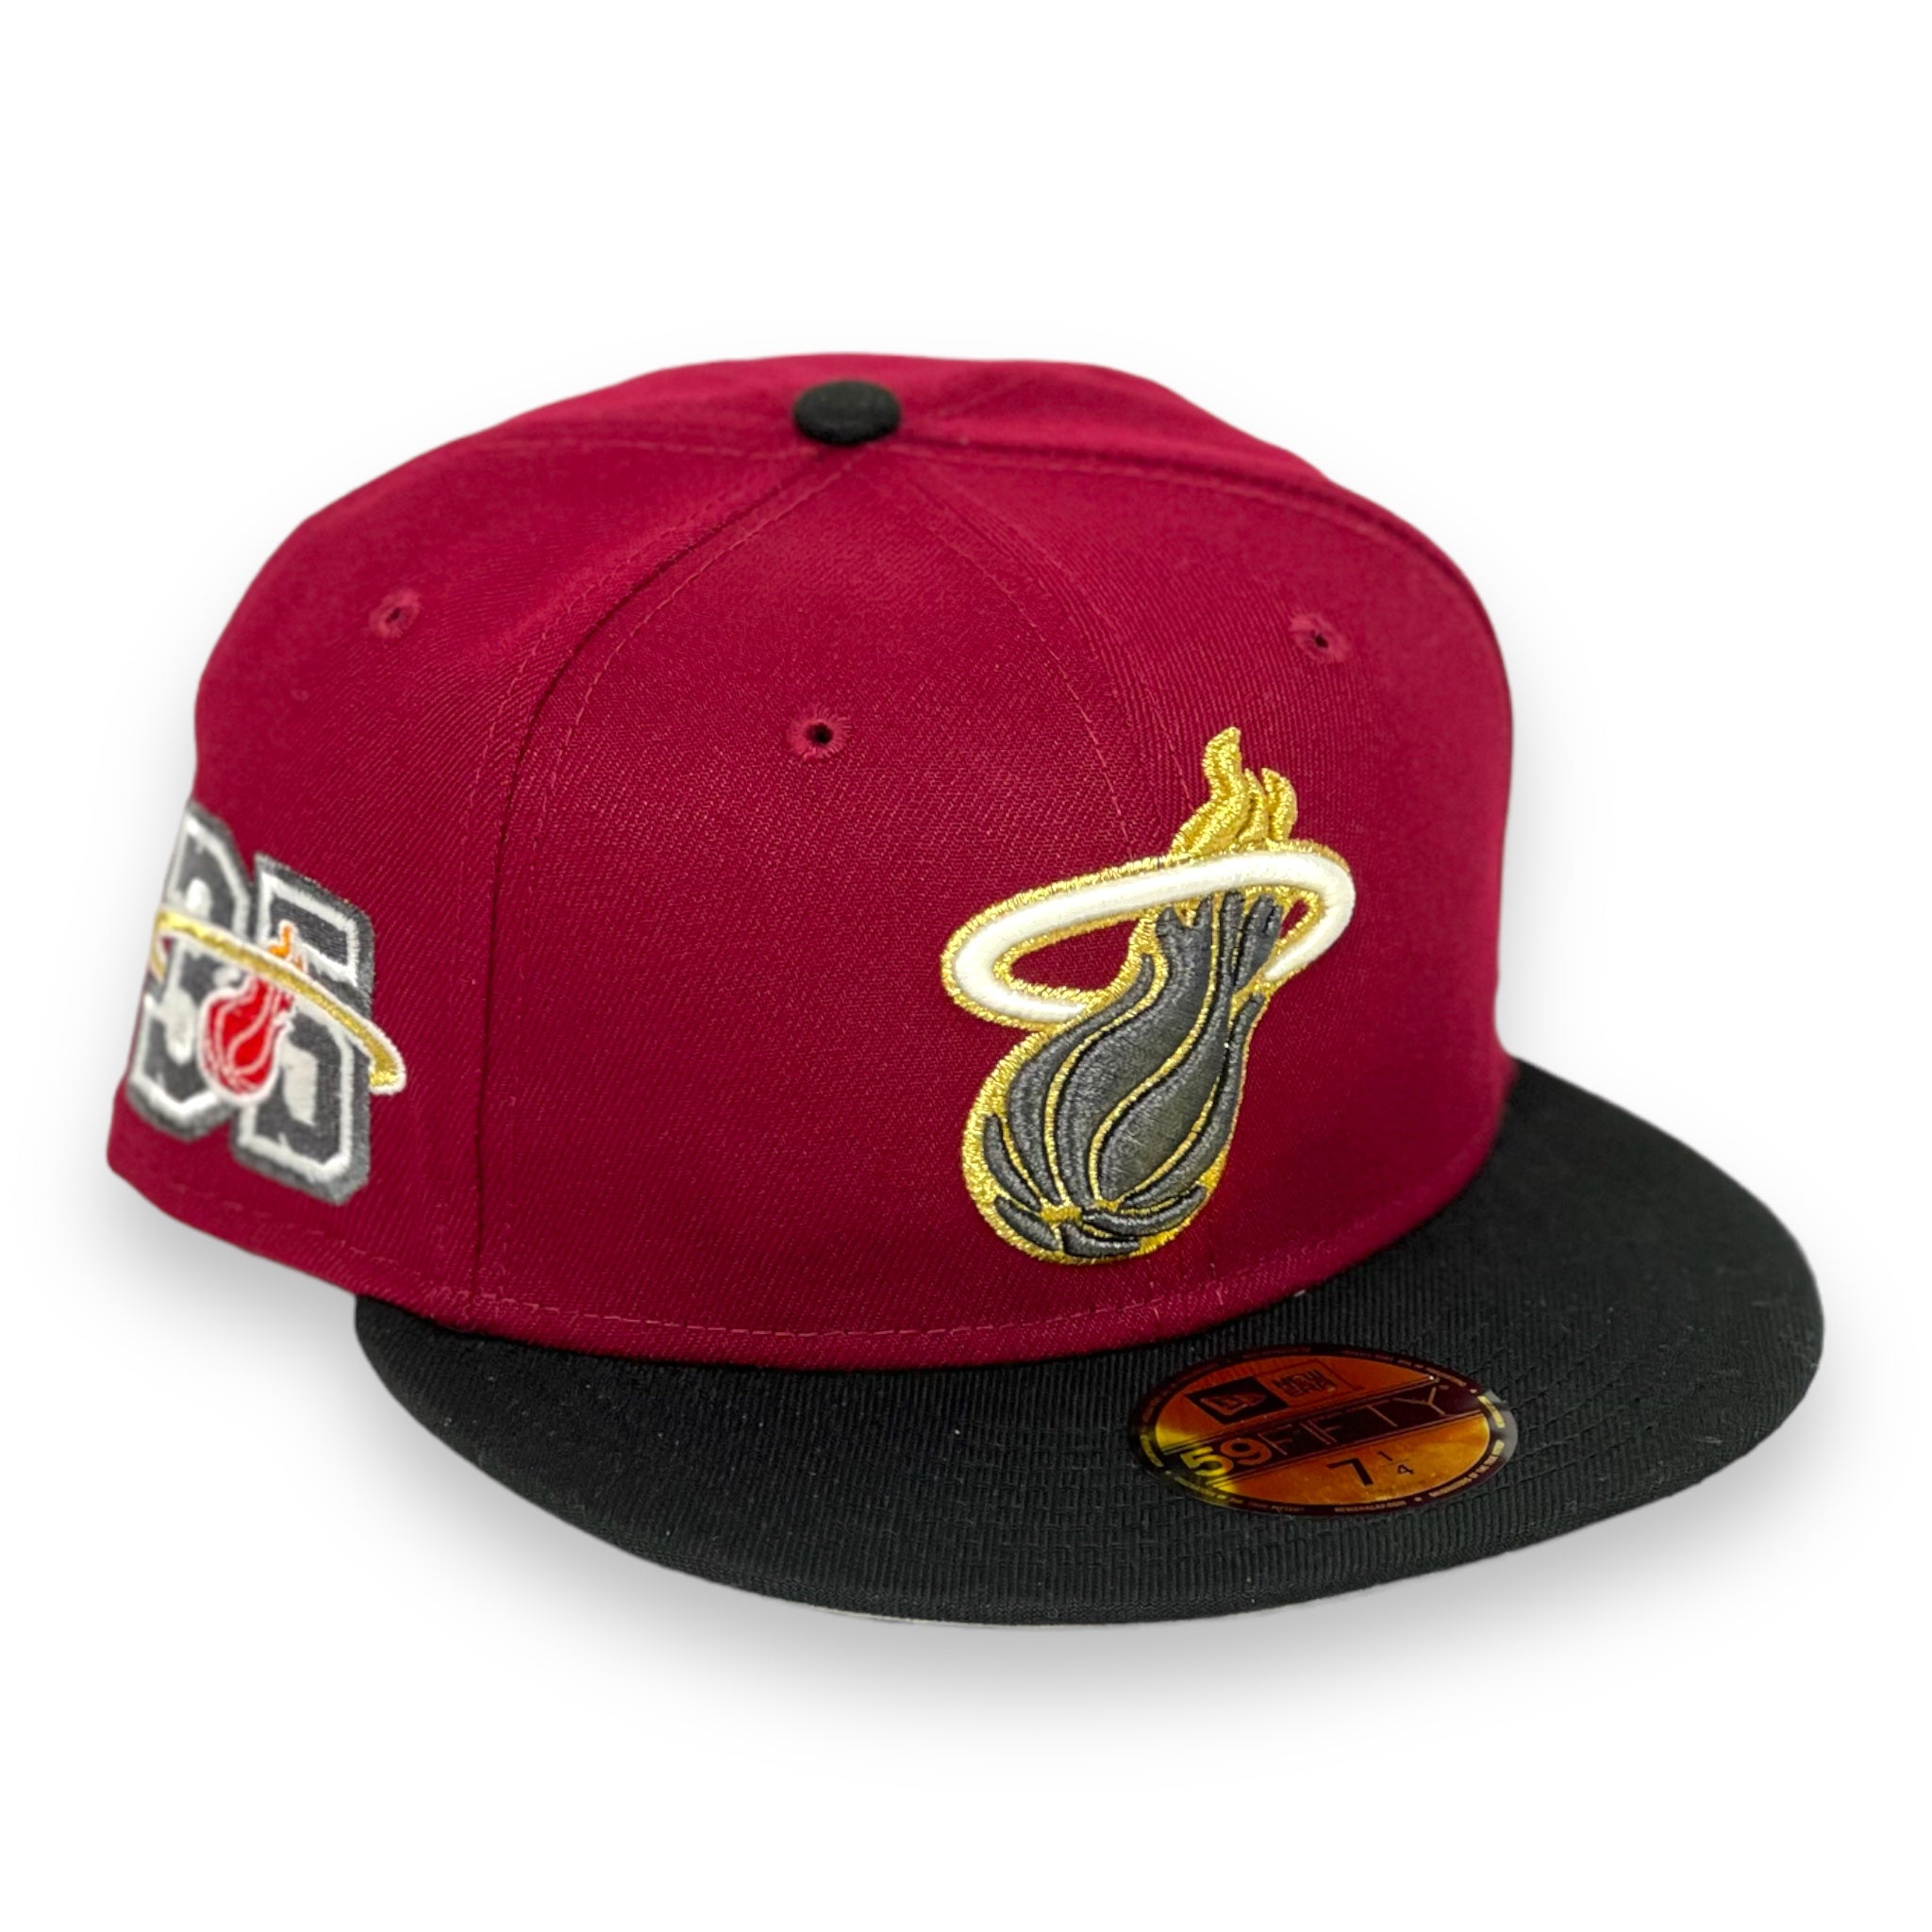 MIAMI HEAT (35TH ANN) NEW ERA 59FIFTY FITTED